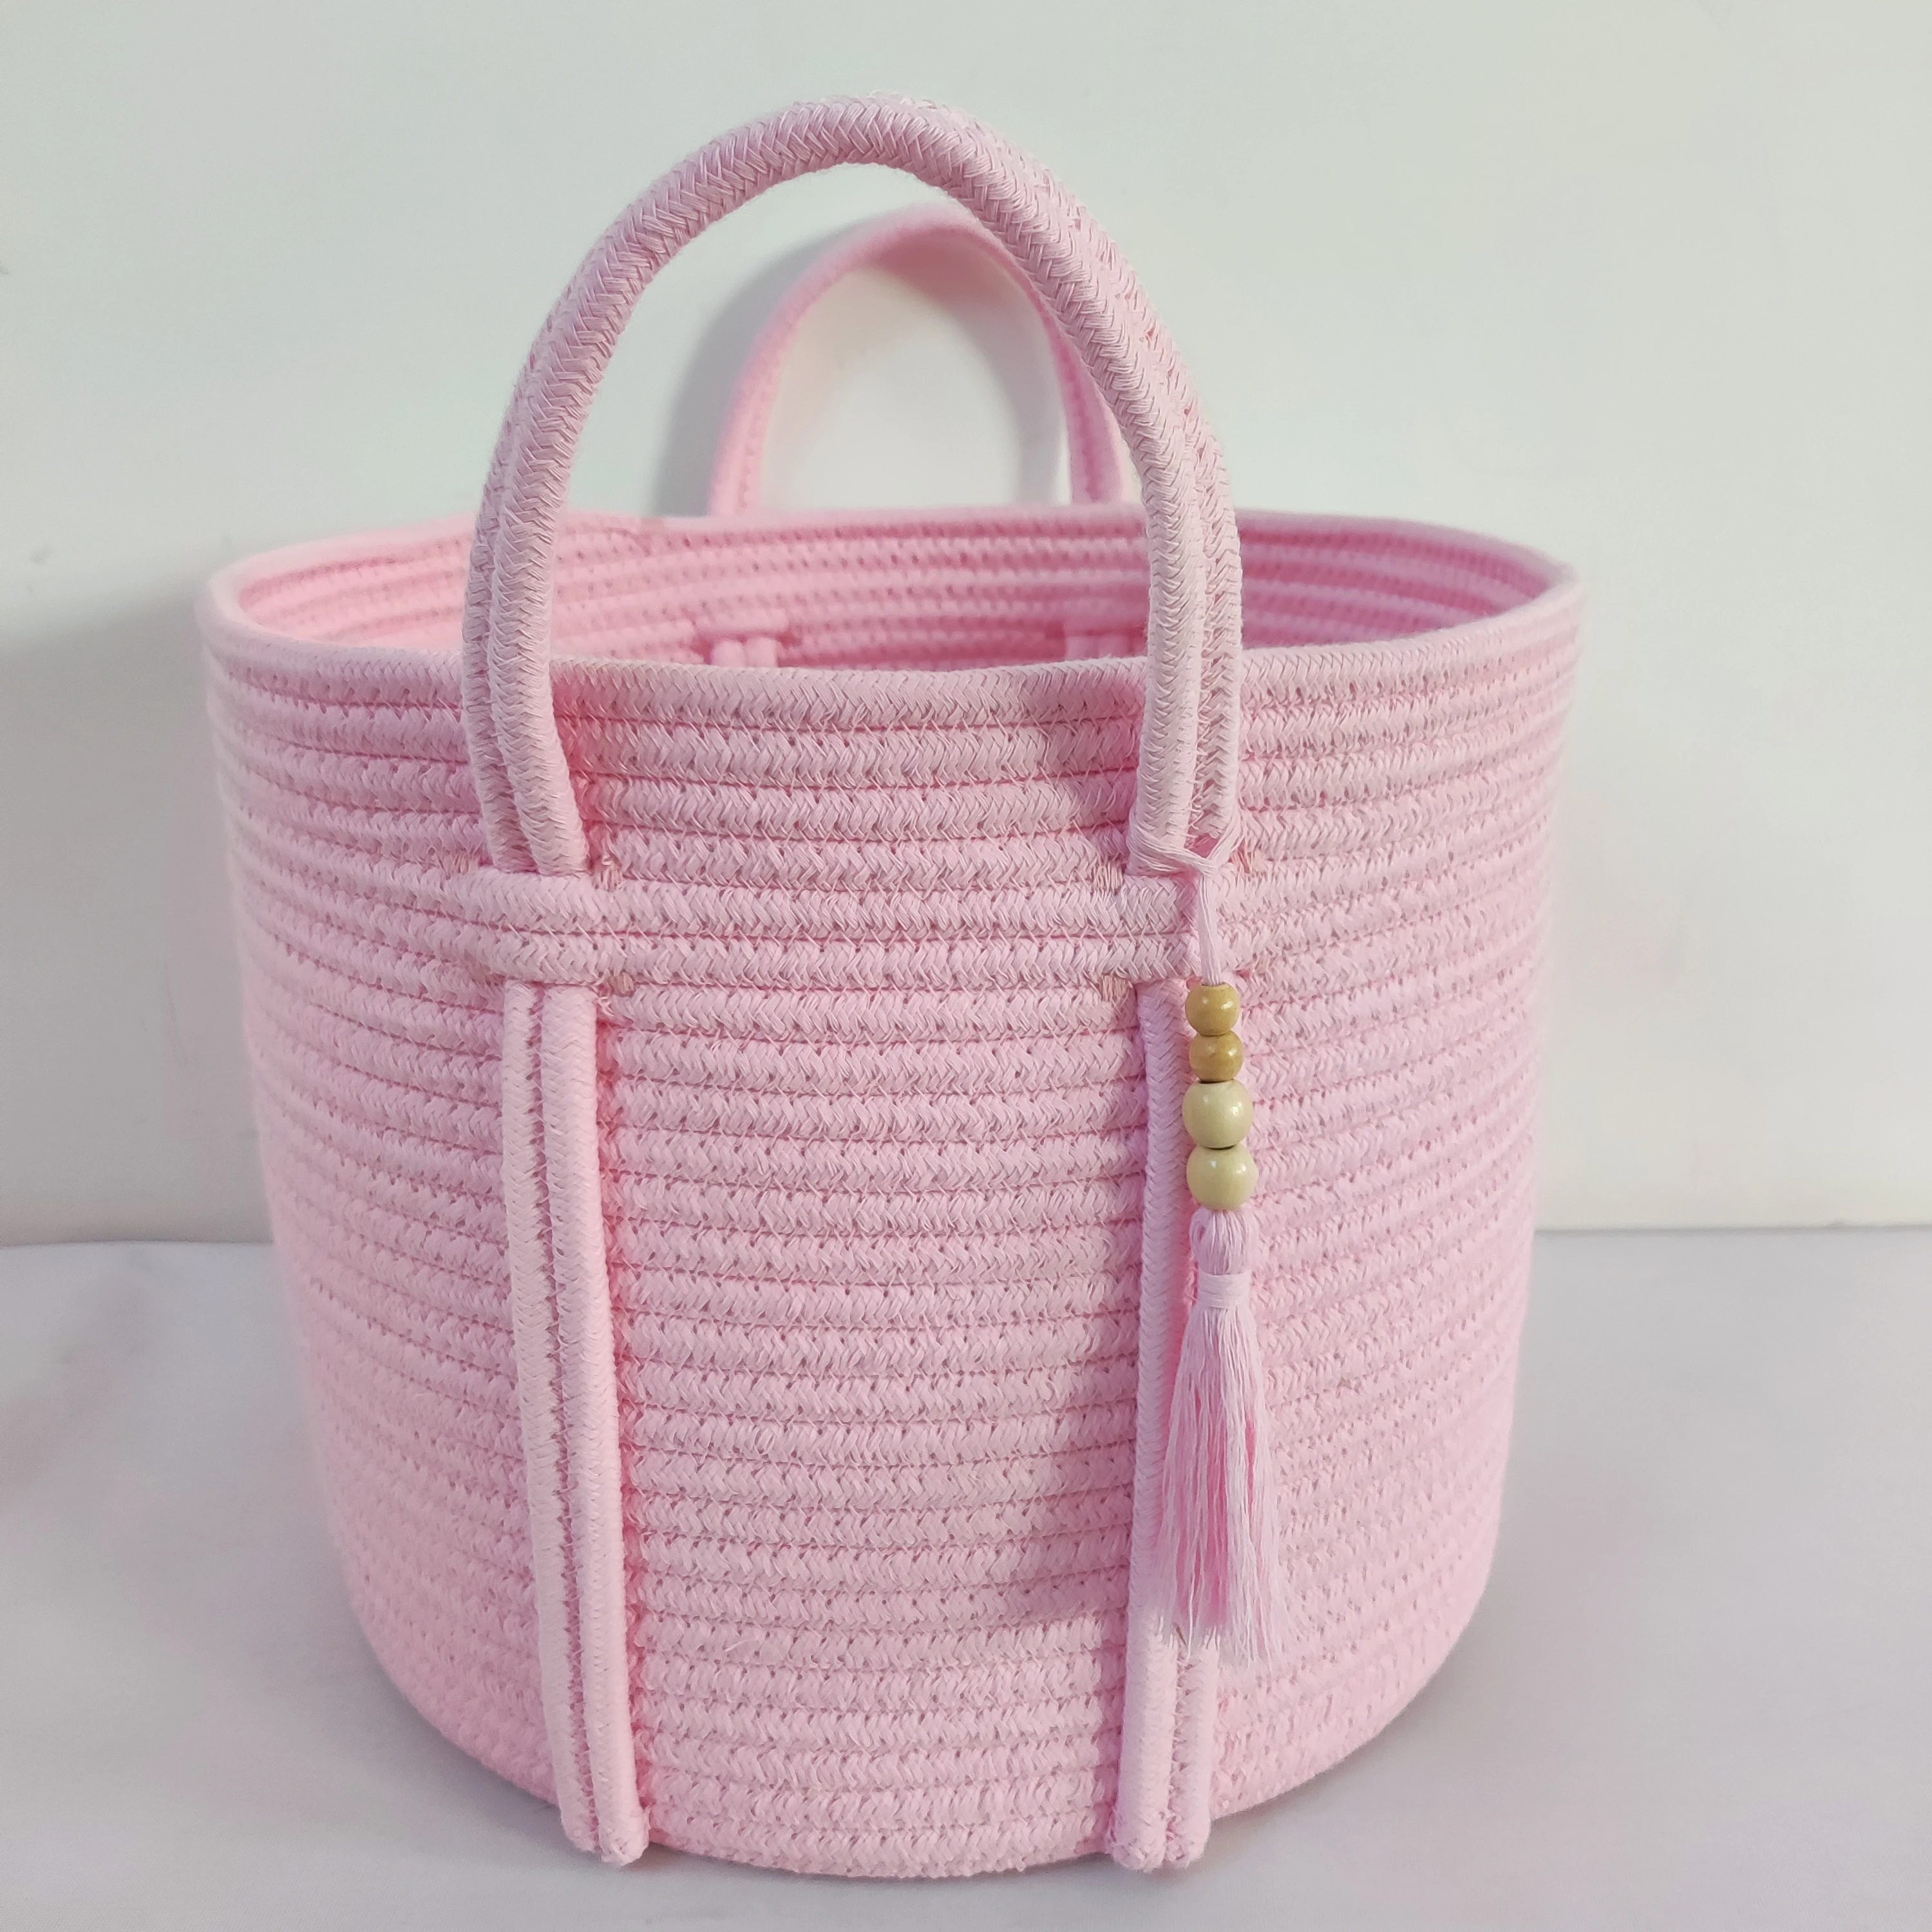 Handmade Eco-Friendly  Bright Pink Color Coiled Large Cotton Rope Nursery Blanket Laundry Hamper Basket